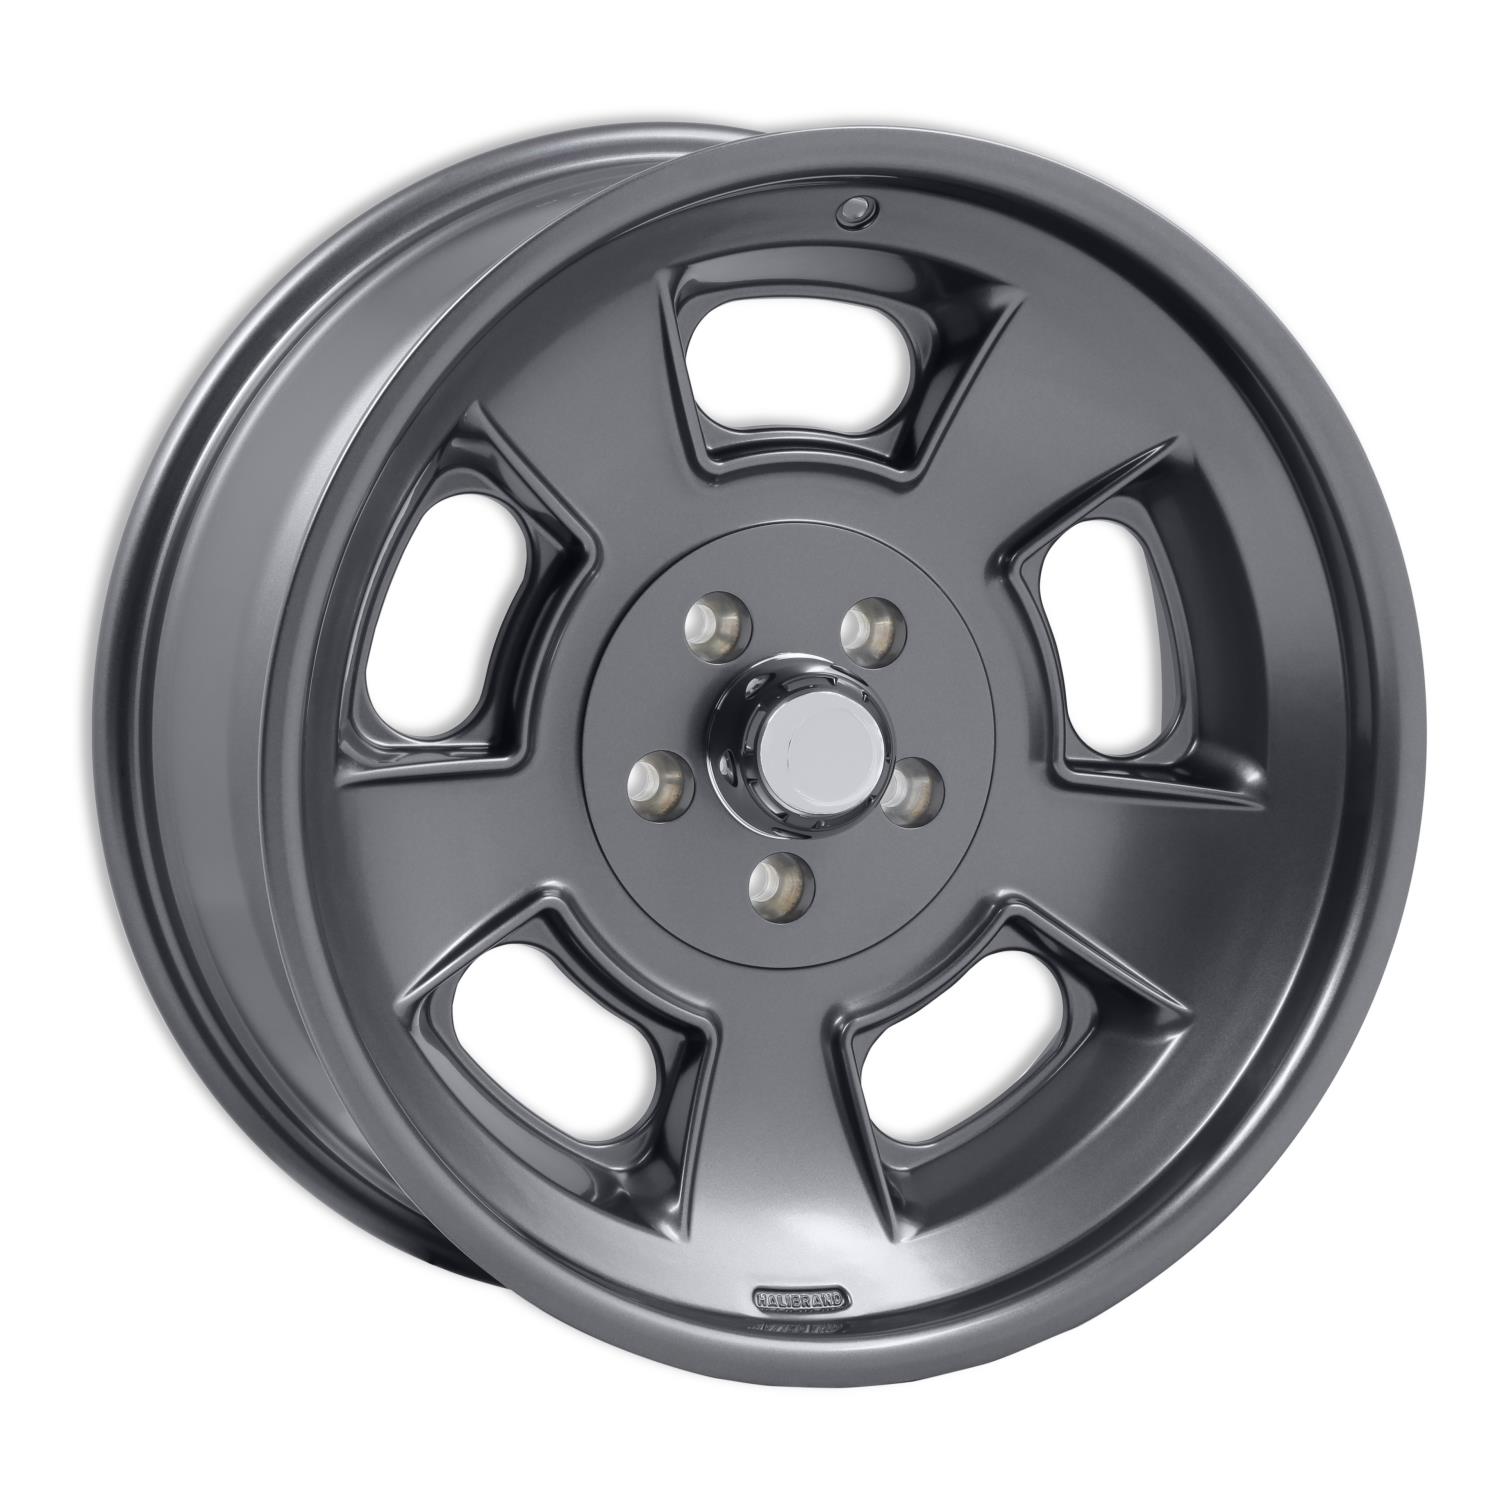 Sprint Front Wheel, Size: 20x8.5", Bolt Pattern: 5x5", Backspace: 4.5" [Anthracite - Semi Gloss Clearcoat]